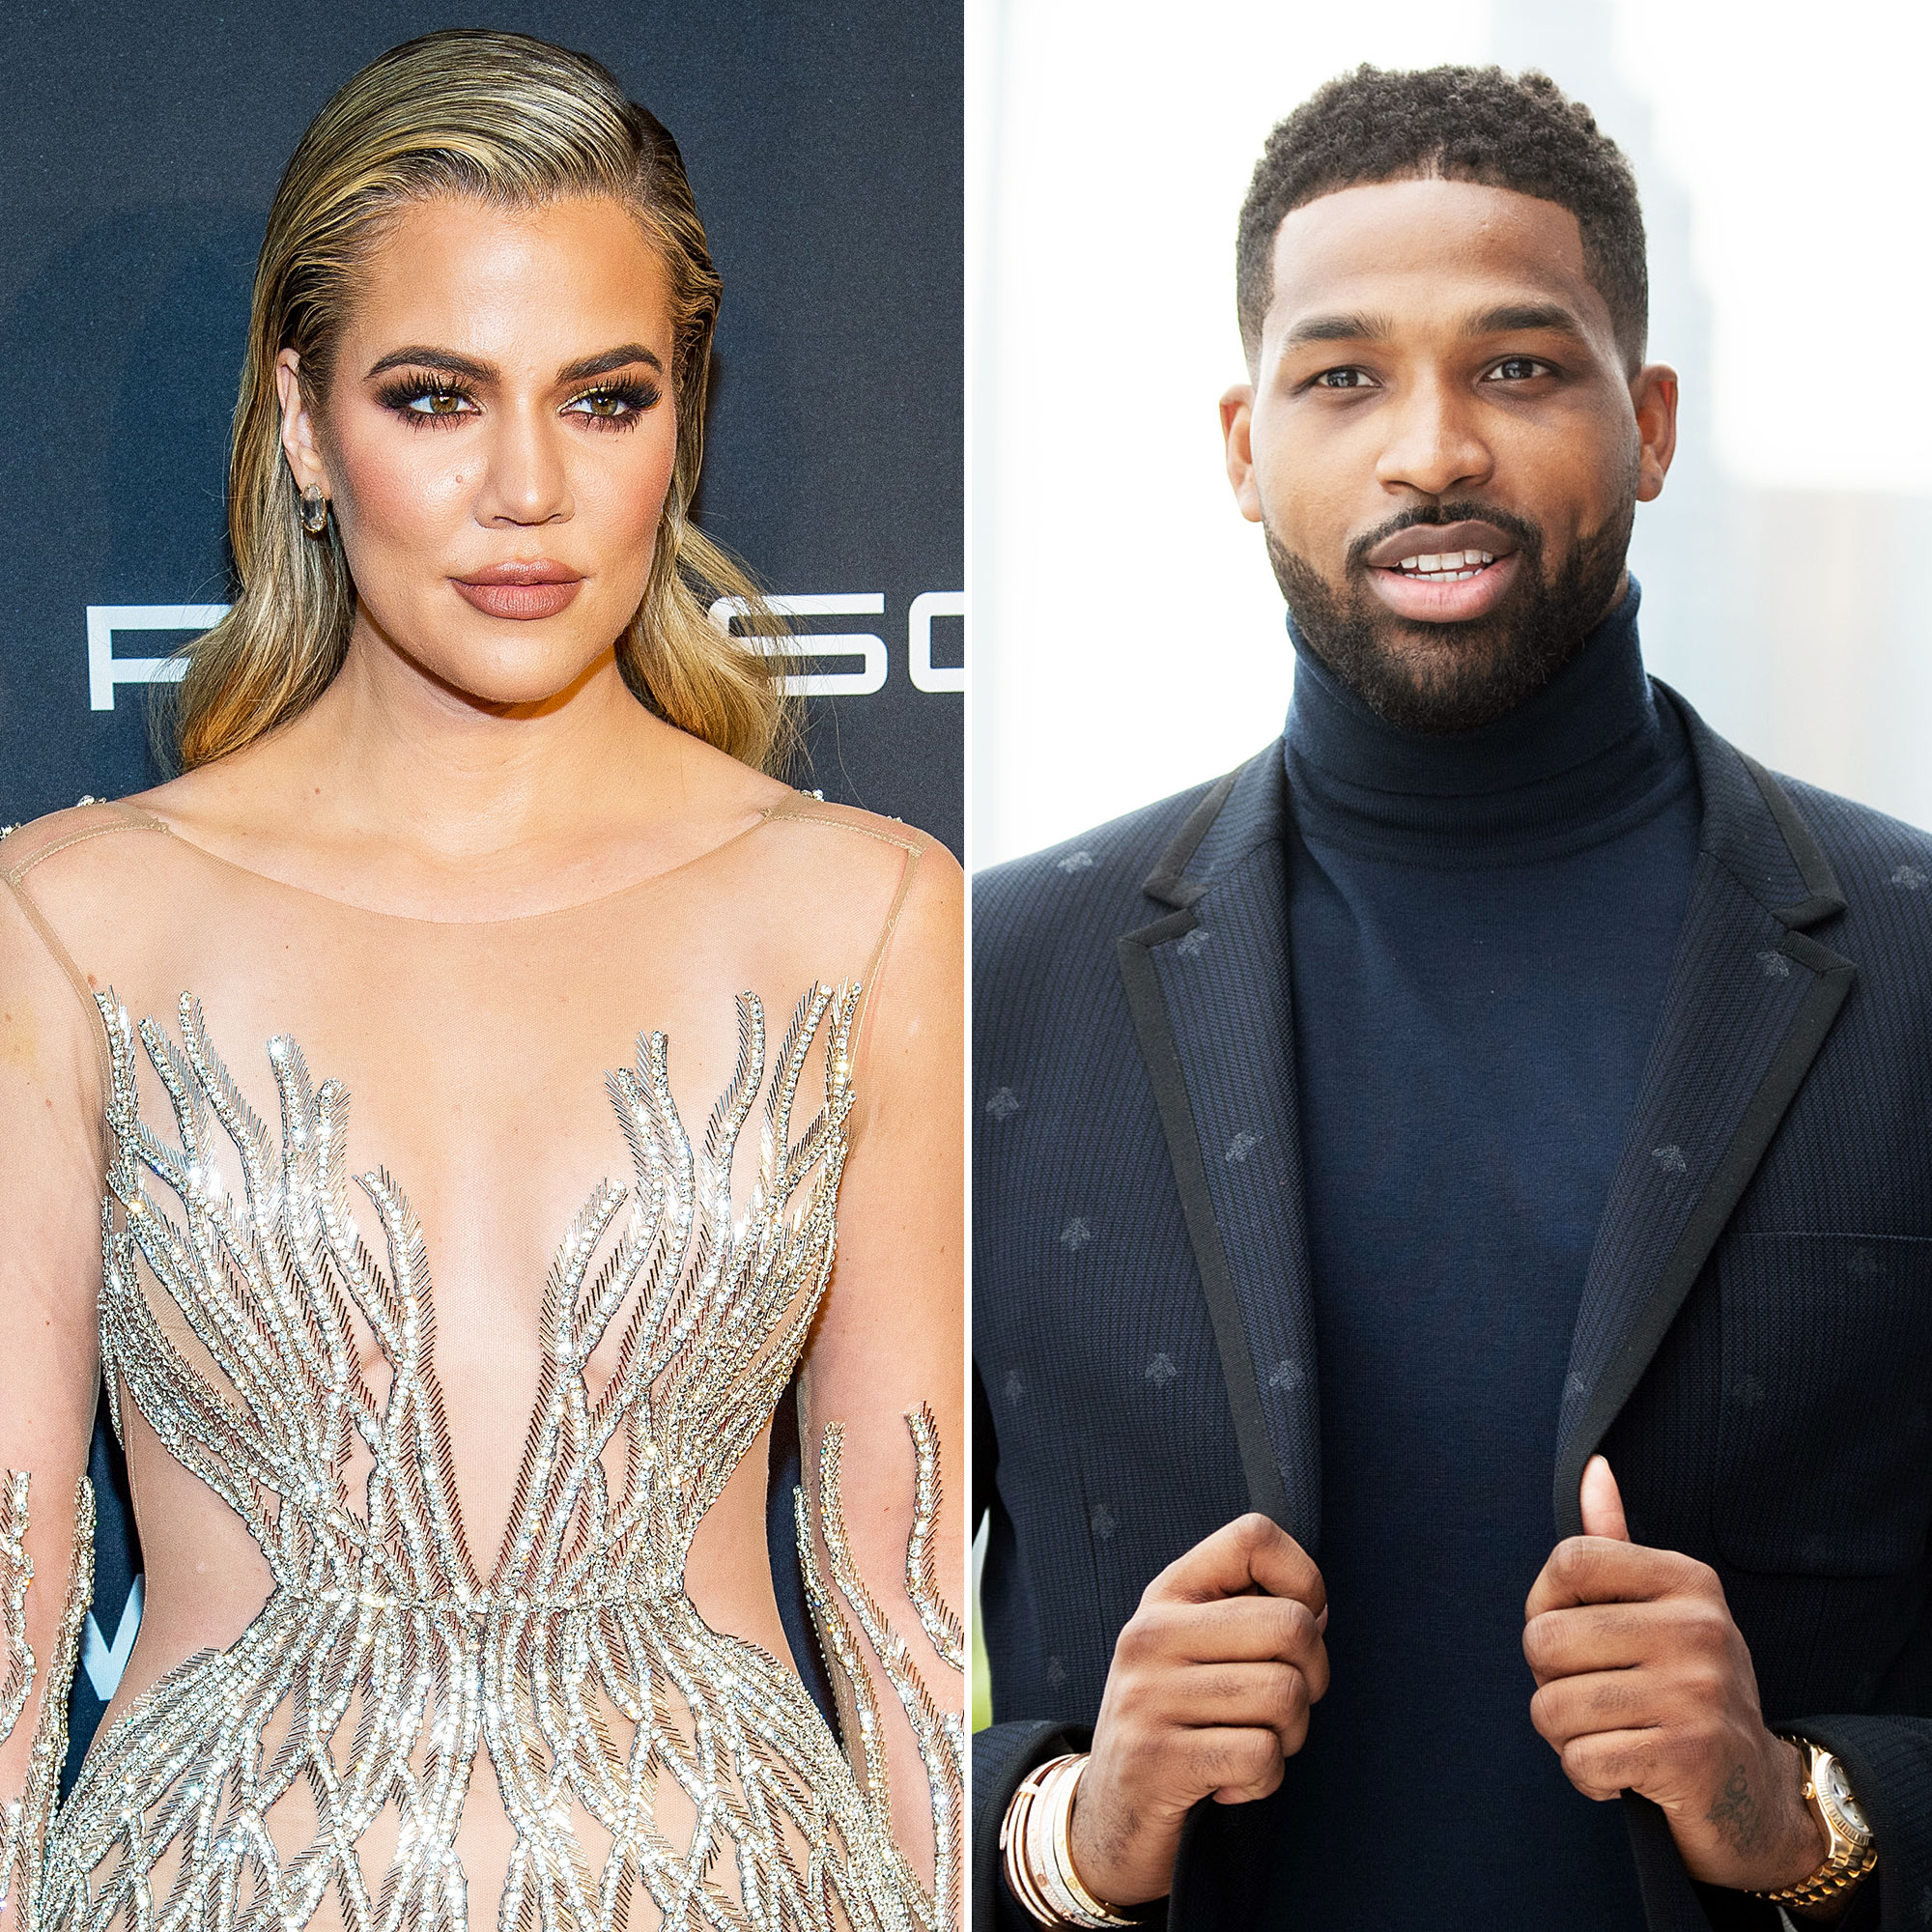 Khloe Kardashian works on her revenge body at the gym at 5am after Tristan  Thompson apologizes for love child scandal